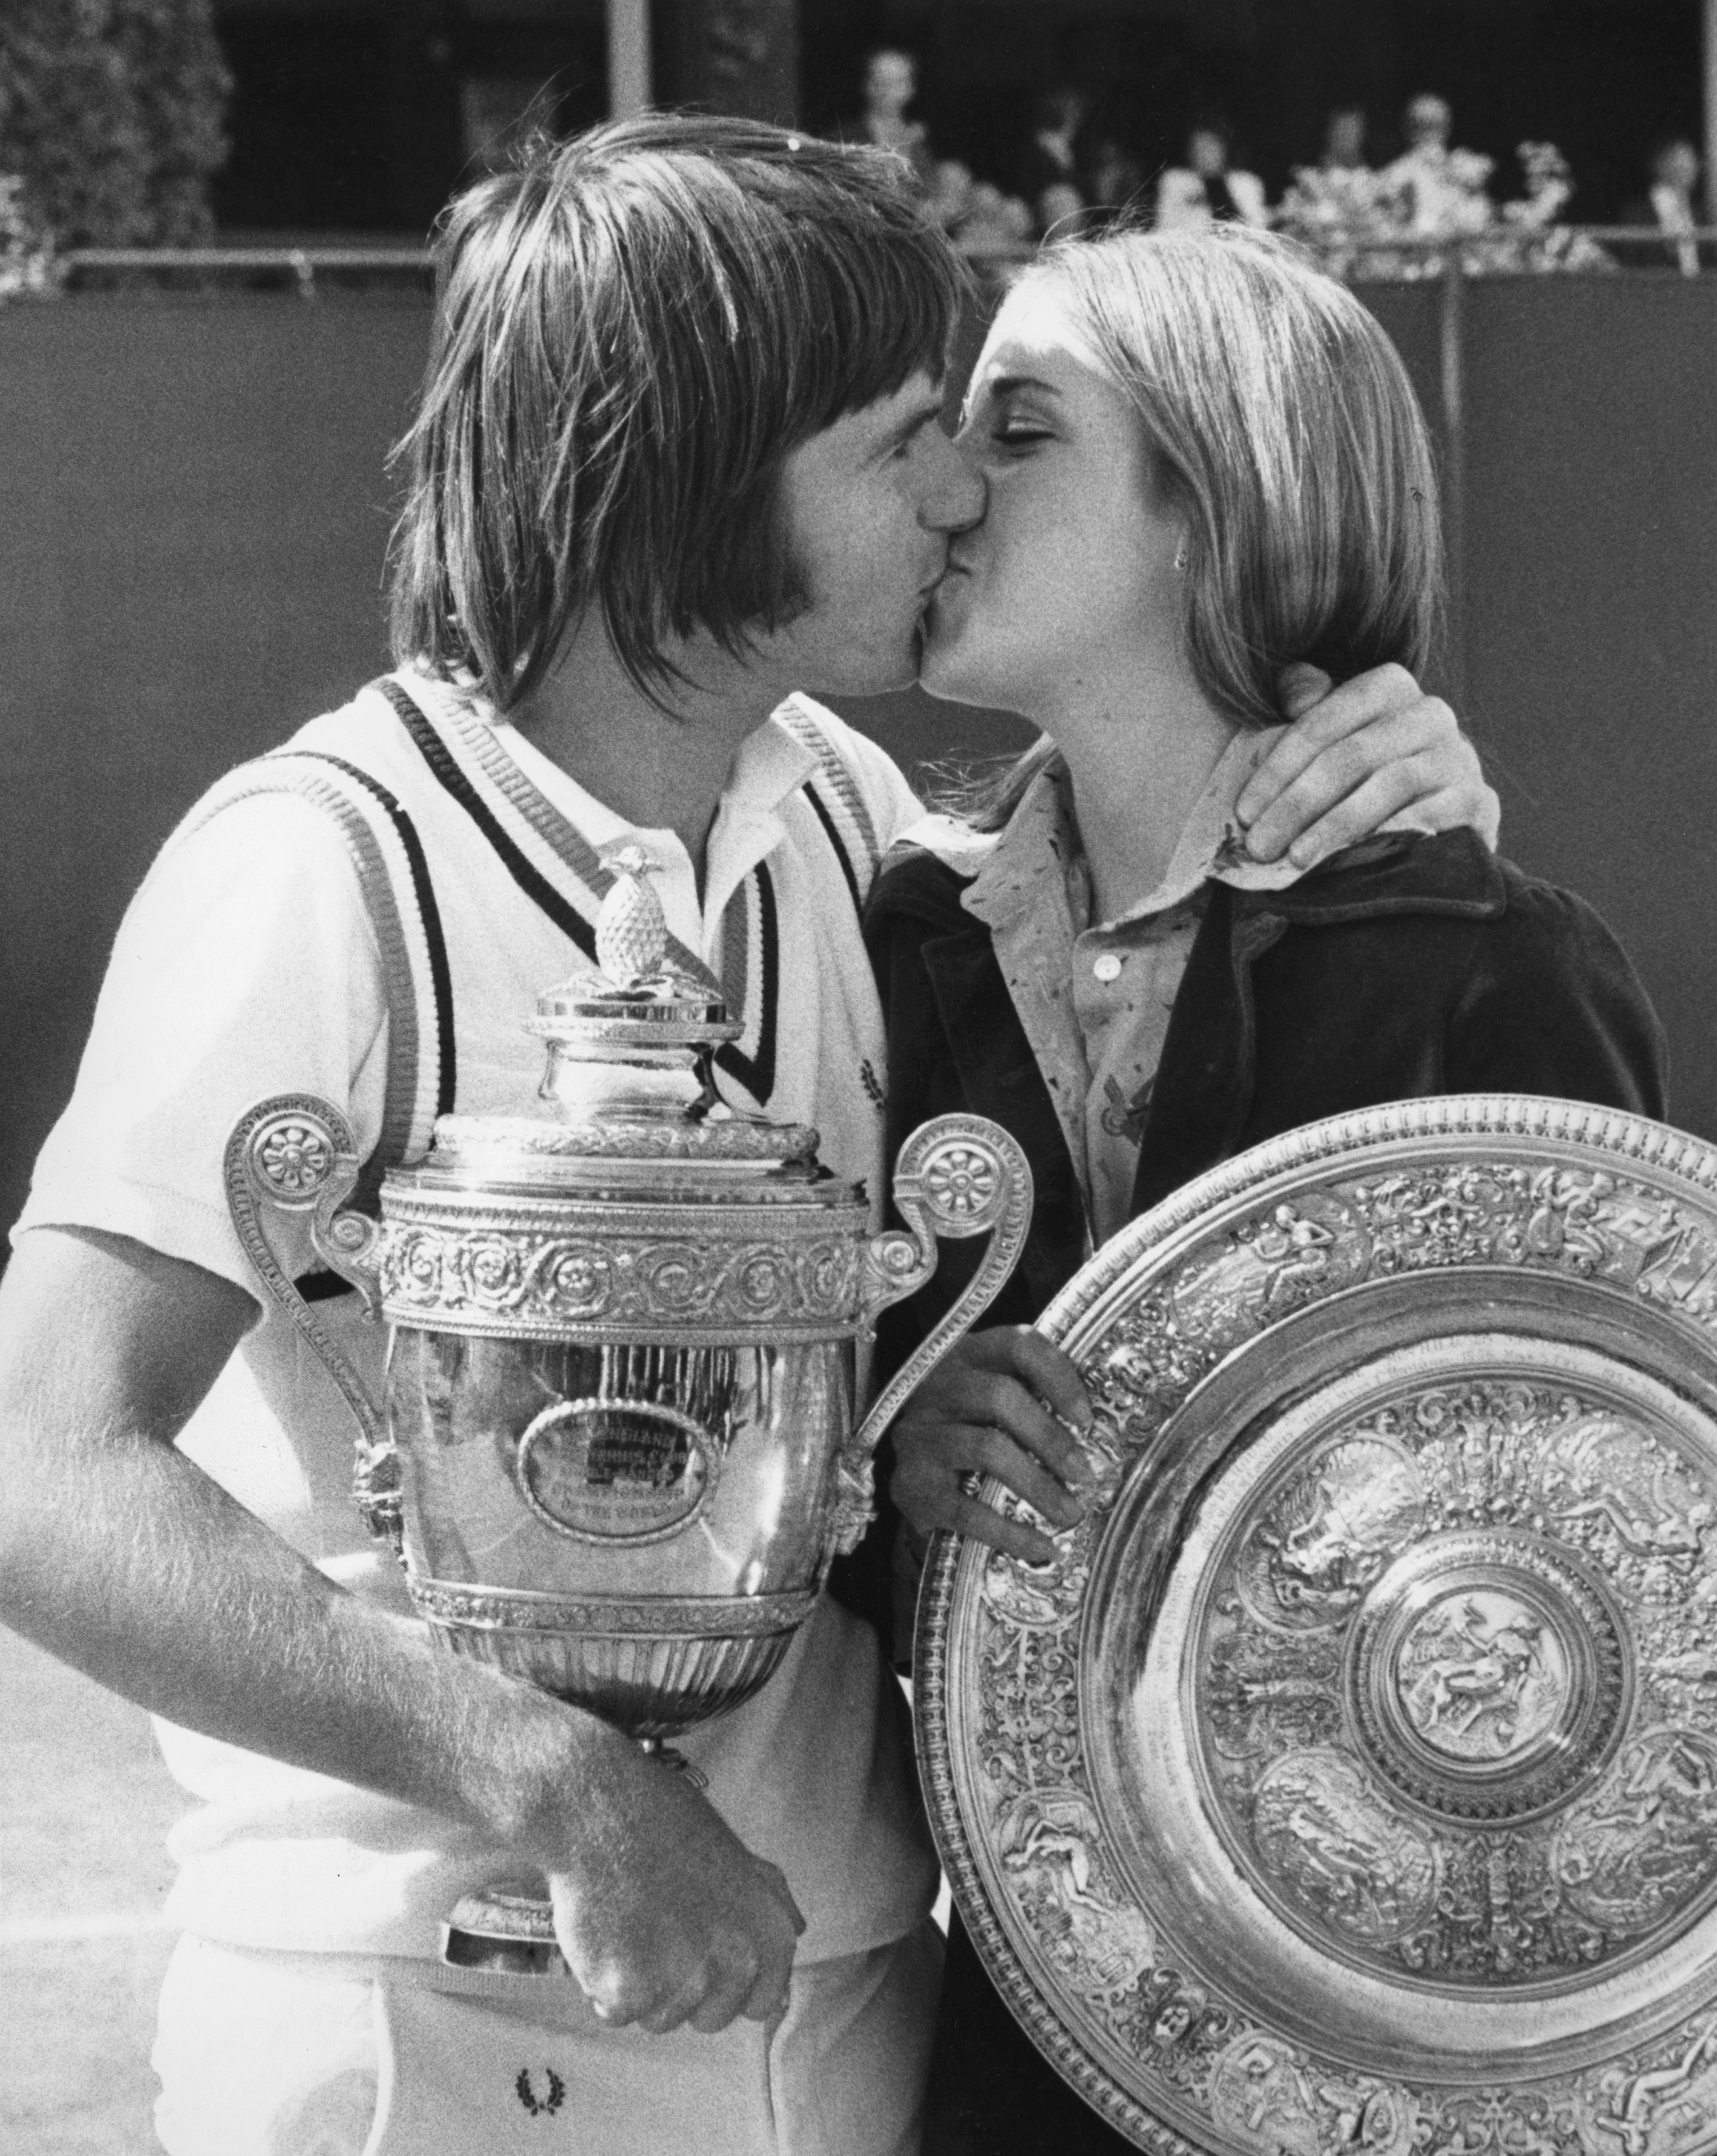 Jimmy Connors and fiancee Chris Evert after Wimbledon in 1974. (Getty Images)